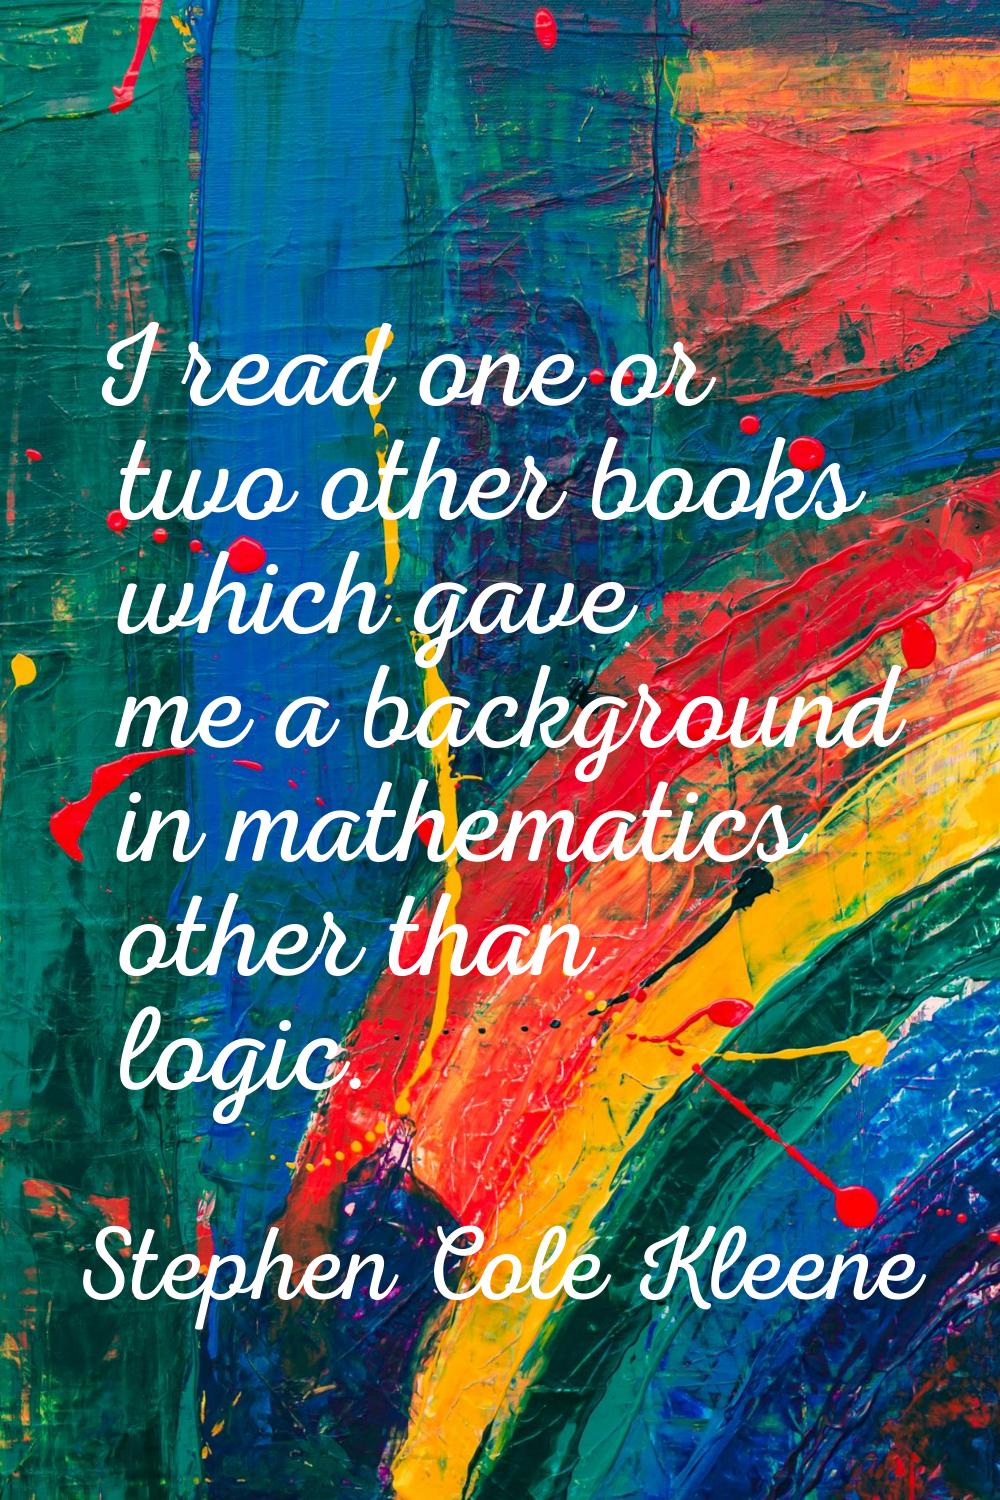 I read one or two other books which gave me a background in mathematics other than logic.